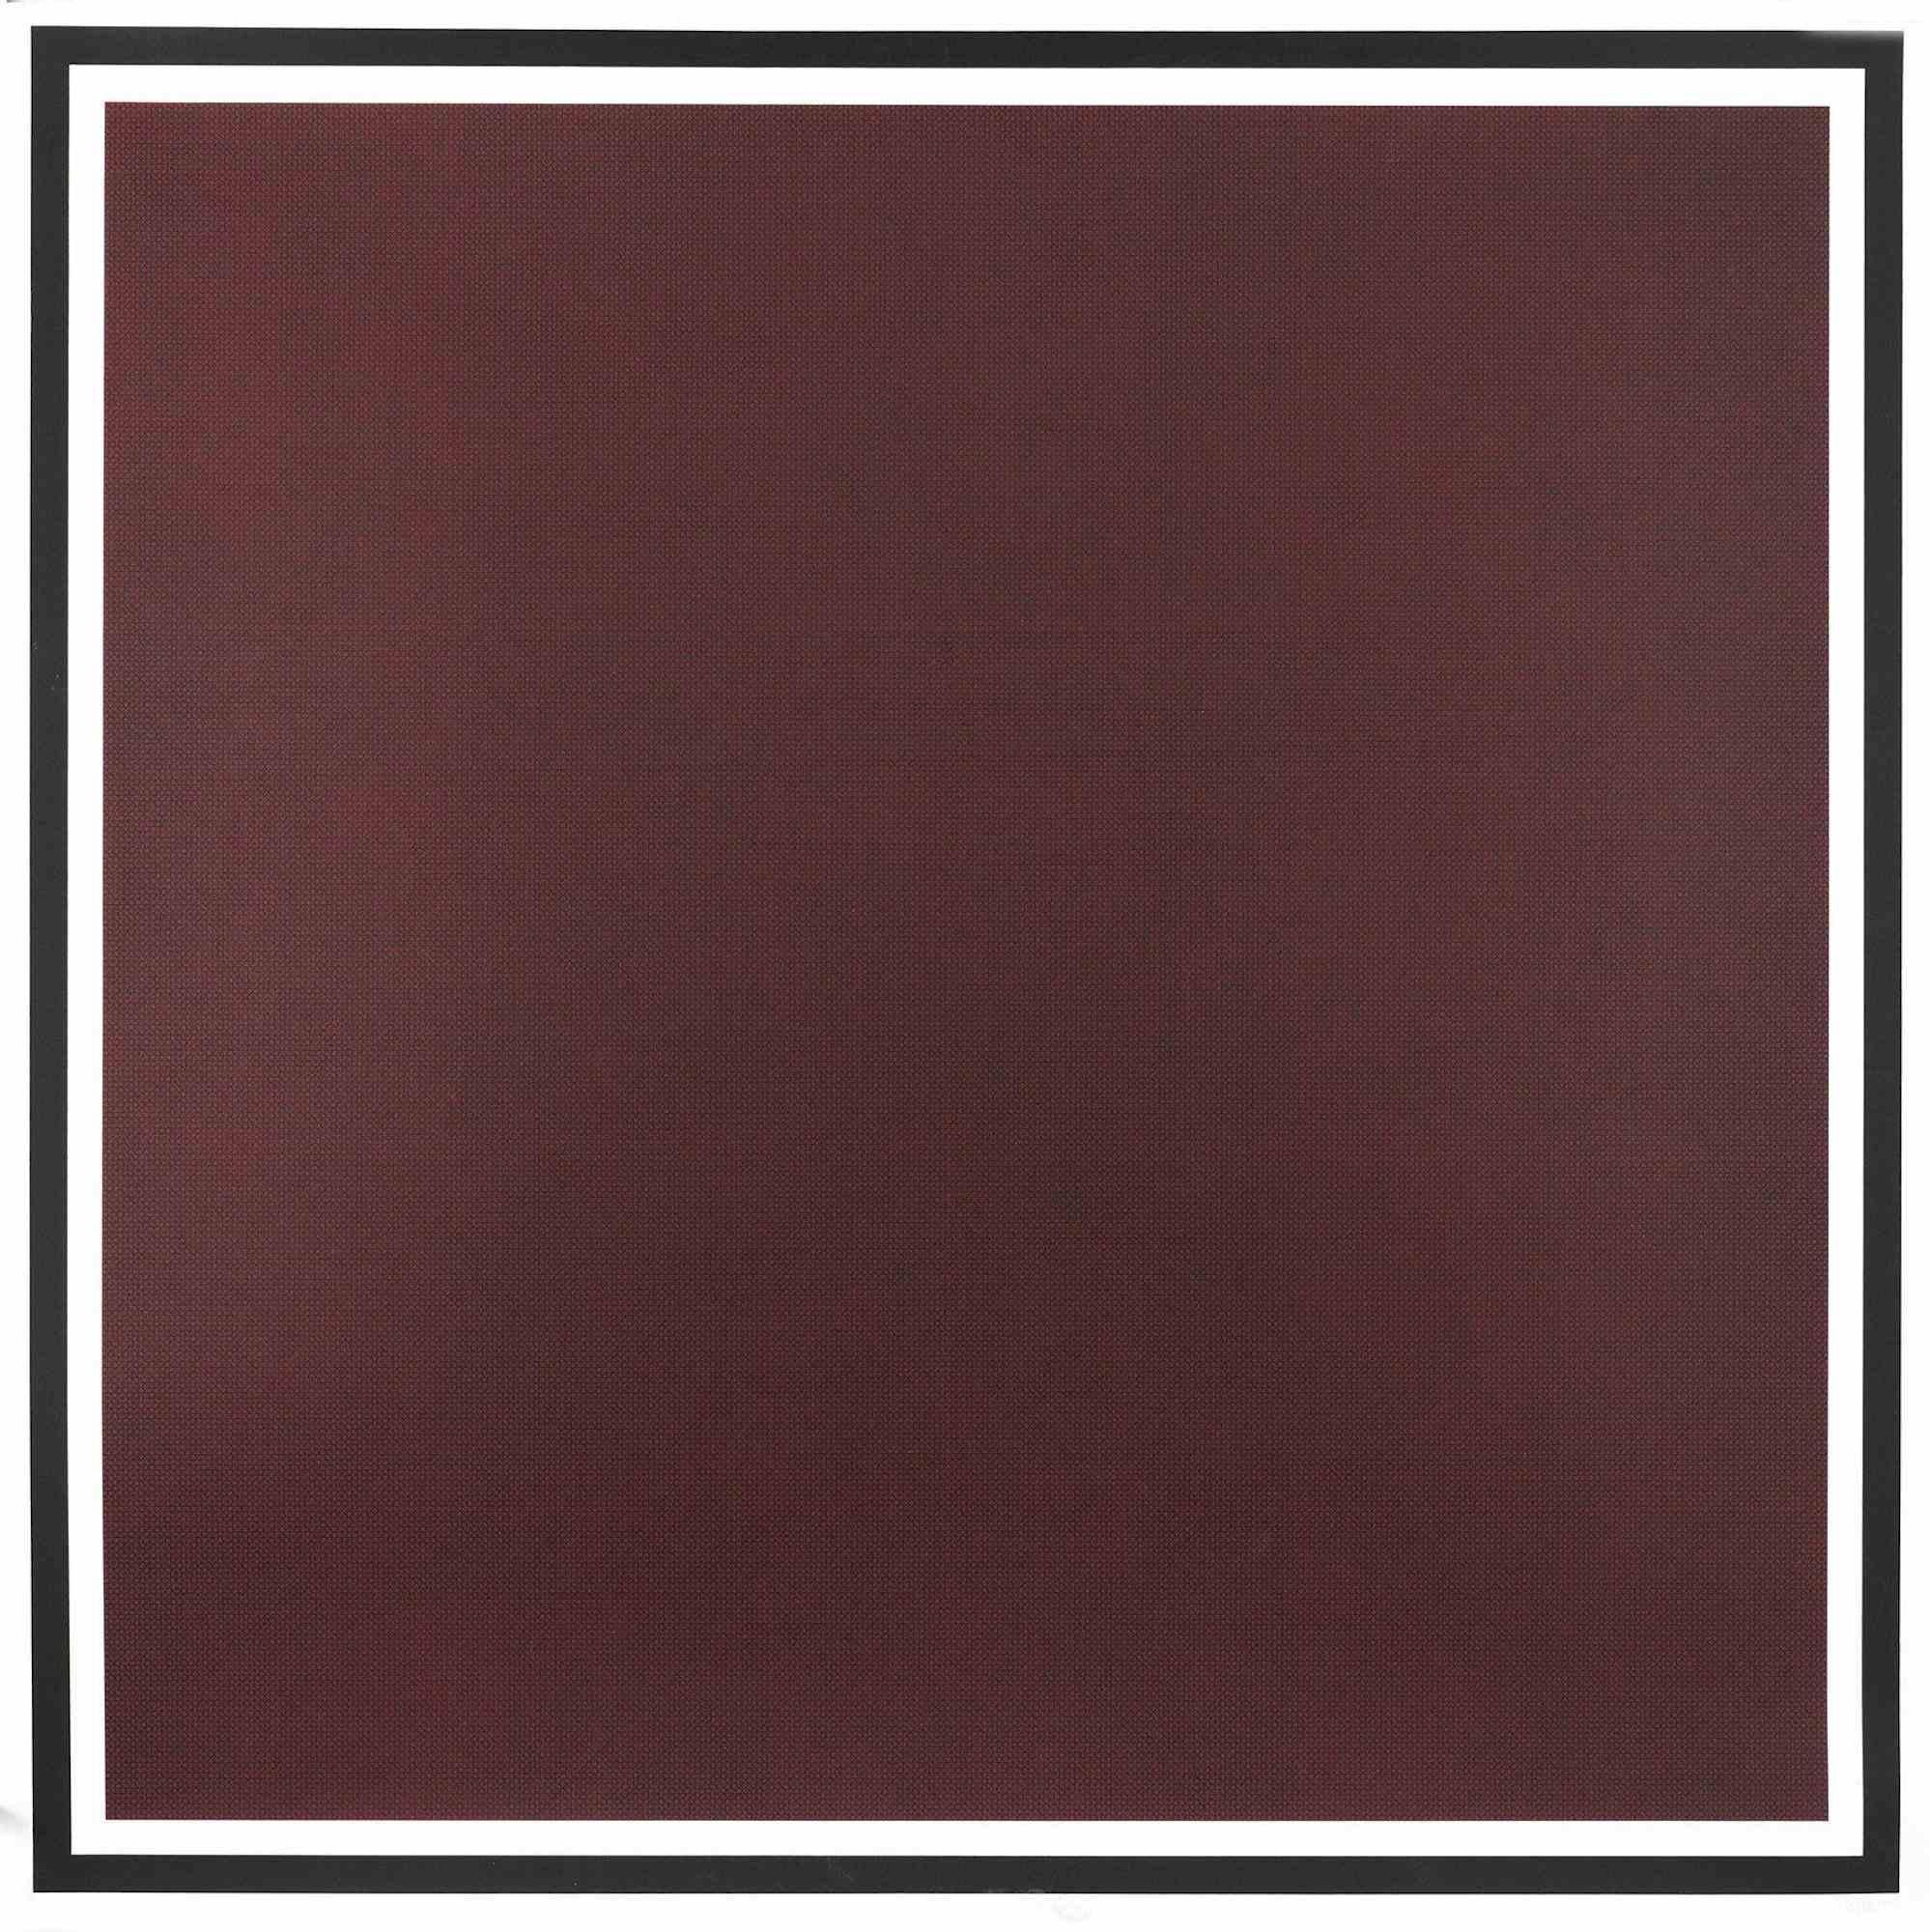 Sol LeWitt Abstract Print - Colors with Lines in Four Directions, Within a Black Border (Red) - 1990